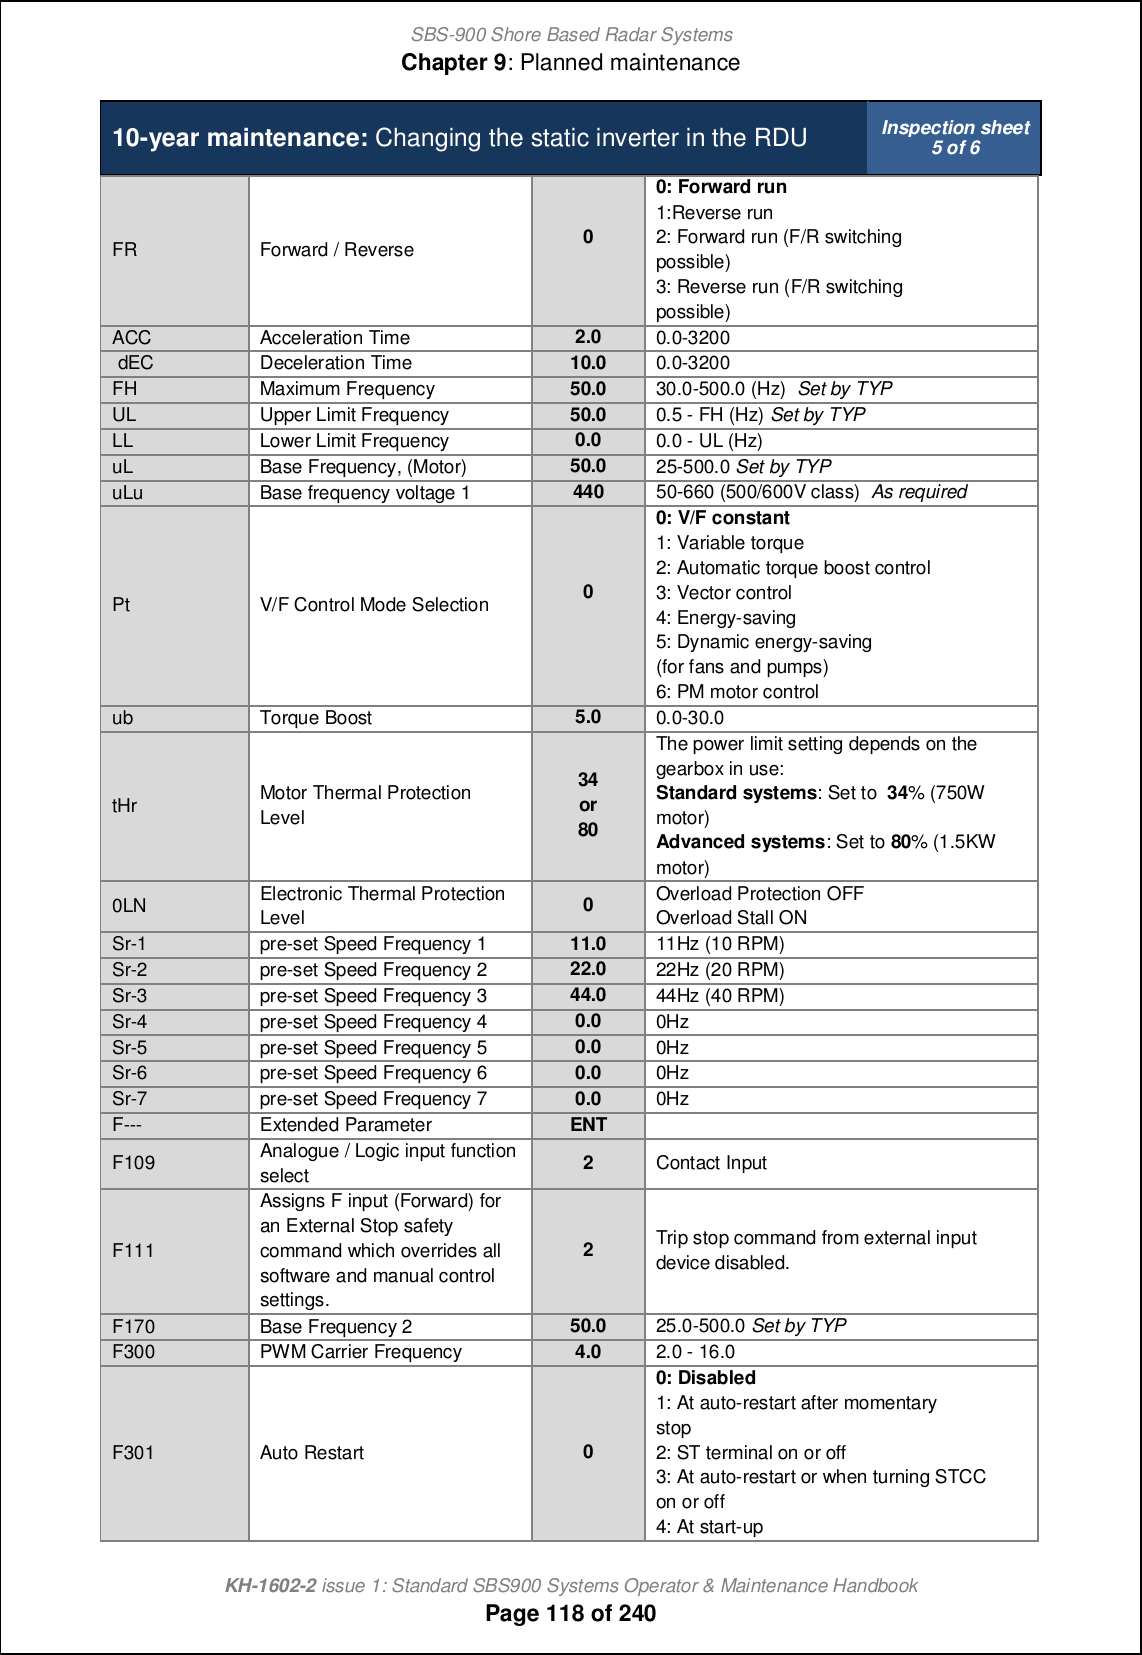 SBS-900 Shore Based Radar SystemsChapter 9: Planned maintenanceKH-1602-2 issue 1: Standard SBS900 Systems Operator &amp; Maintenance HandbookPage 118 of 24010-year maintenance: Changing the static inverter in the RDU Inspection sheet5 of 6FR Forward / Reverse 00: Forward run1:Reverse run2: Forward run (F/R switchingpossible)3: Reverse run (F/R switchingpossible)ACC Acceleration Time2.00.0-3200dEC Deceleration Time 10.0 0.0-3200FH Maximum Frequency 50.0 30.0-500.0 (Hz) Set by TYPUL Upper Limit Frequency 50.0 0.5 - FH (Hz) Set by TYPLL Lower Limit Frequency0.00.0 - UL (Hz)uL Base Frequency, (Motor)50.025-500.0 Set by TYPuLu Base frequency voltage 144050-660 (500/600V class)As requiredPt V/F Control Mode Selection 00: V/F constant1: Variable torque2: Automatic torque boost control3: Vector control4: Energy-saving5: Dynamic energy-saving(for fans and pumps)6: PM motor controlub Torque Boost5.00.0-30.0tHr Motor Thermal ProtectionLevel34or80The power limit setting depends on thegearbox in use:Standard systems: Set to 34% (750Wmotor)Advanced systems: Set to 80% (1.5KWmotor)0LN Electronic Thermal ProtectionLevel 0Overload Protection OFFOverload Stall ONSr-1 pre-set Speed Frequency 1 11.0 11Hz (10 RPM)Sr-2 pre-set Speed Frequency 222.022Hz (20 RPM)Sr-3 pre-set Speed Frequency 344.044Hz (40 RPM)Sr-4 pre-set Speed Frequency 40.00HzSr-5 pre-set Speed Frequency 50.00HzSr-6 pre-set Speed Frequency 6 0.0 0HzSr-7 pre-set Speed Frequency 7 0.0 0HzF--- Extended Parameter ENTF109 Analogue / Logic input functionselect 2Contact InputF111Assigns F input (Forward) foran External Stop safetycommand which overrides allsoftware and manual controlsettings.2Trip stop command from external inputdevice disabled.F170 Base Frequency 2 50.0 25.0-500.0 Set by TYPF300 PWM Carrier Frequency 4.0 2.0 - 16.0F301 Auto Restart 00: Disabled1: At auto-restart after momentarystop2: ST terminal on or off3: At auto-restart or when turning STCCon or off4: At start-up